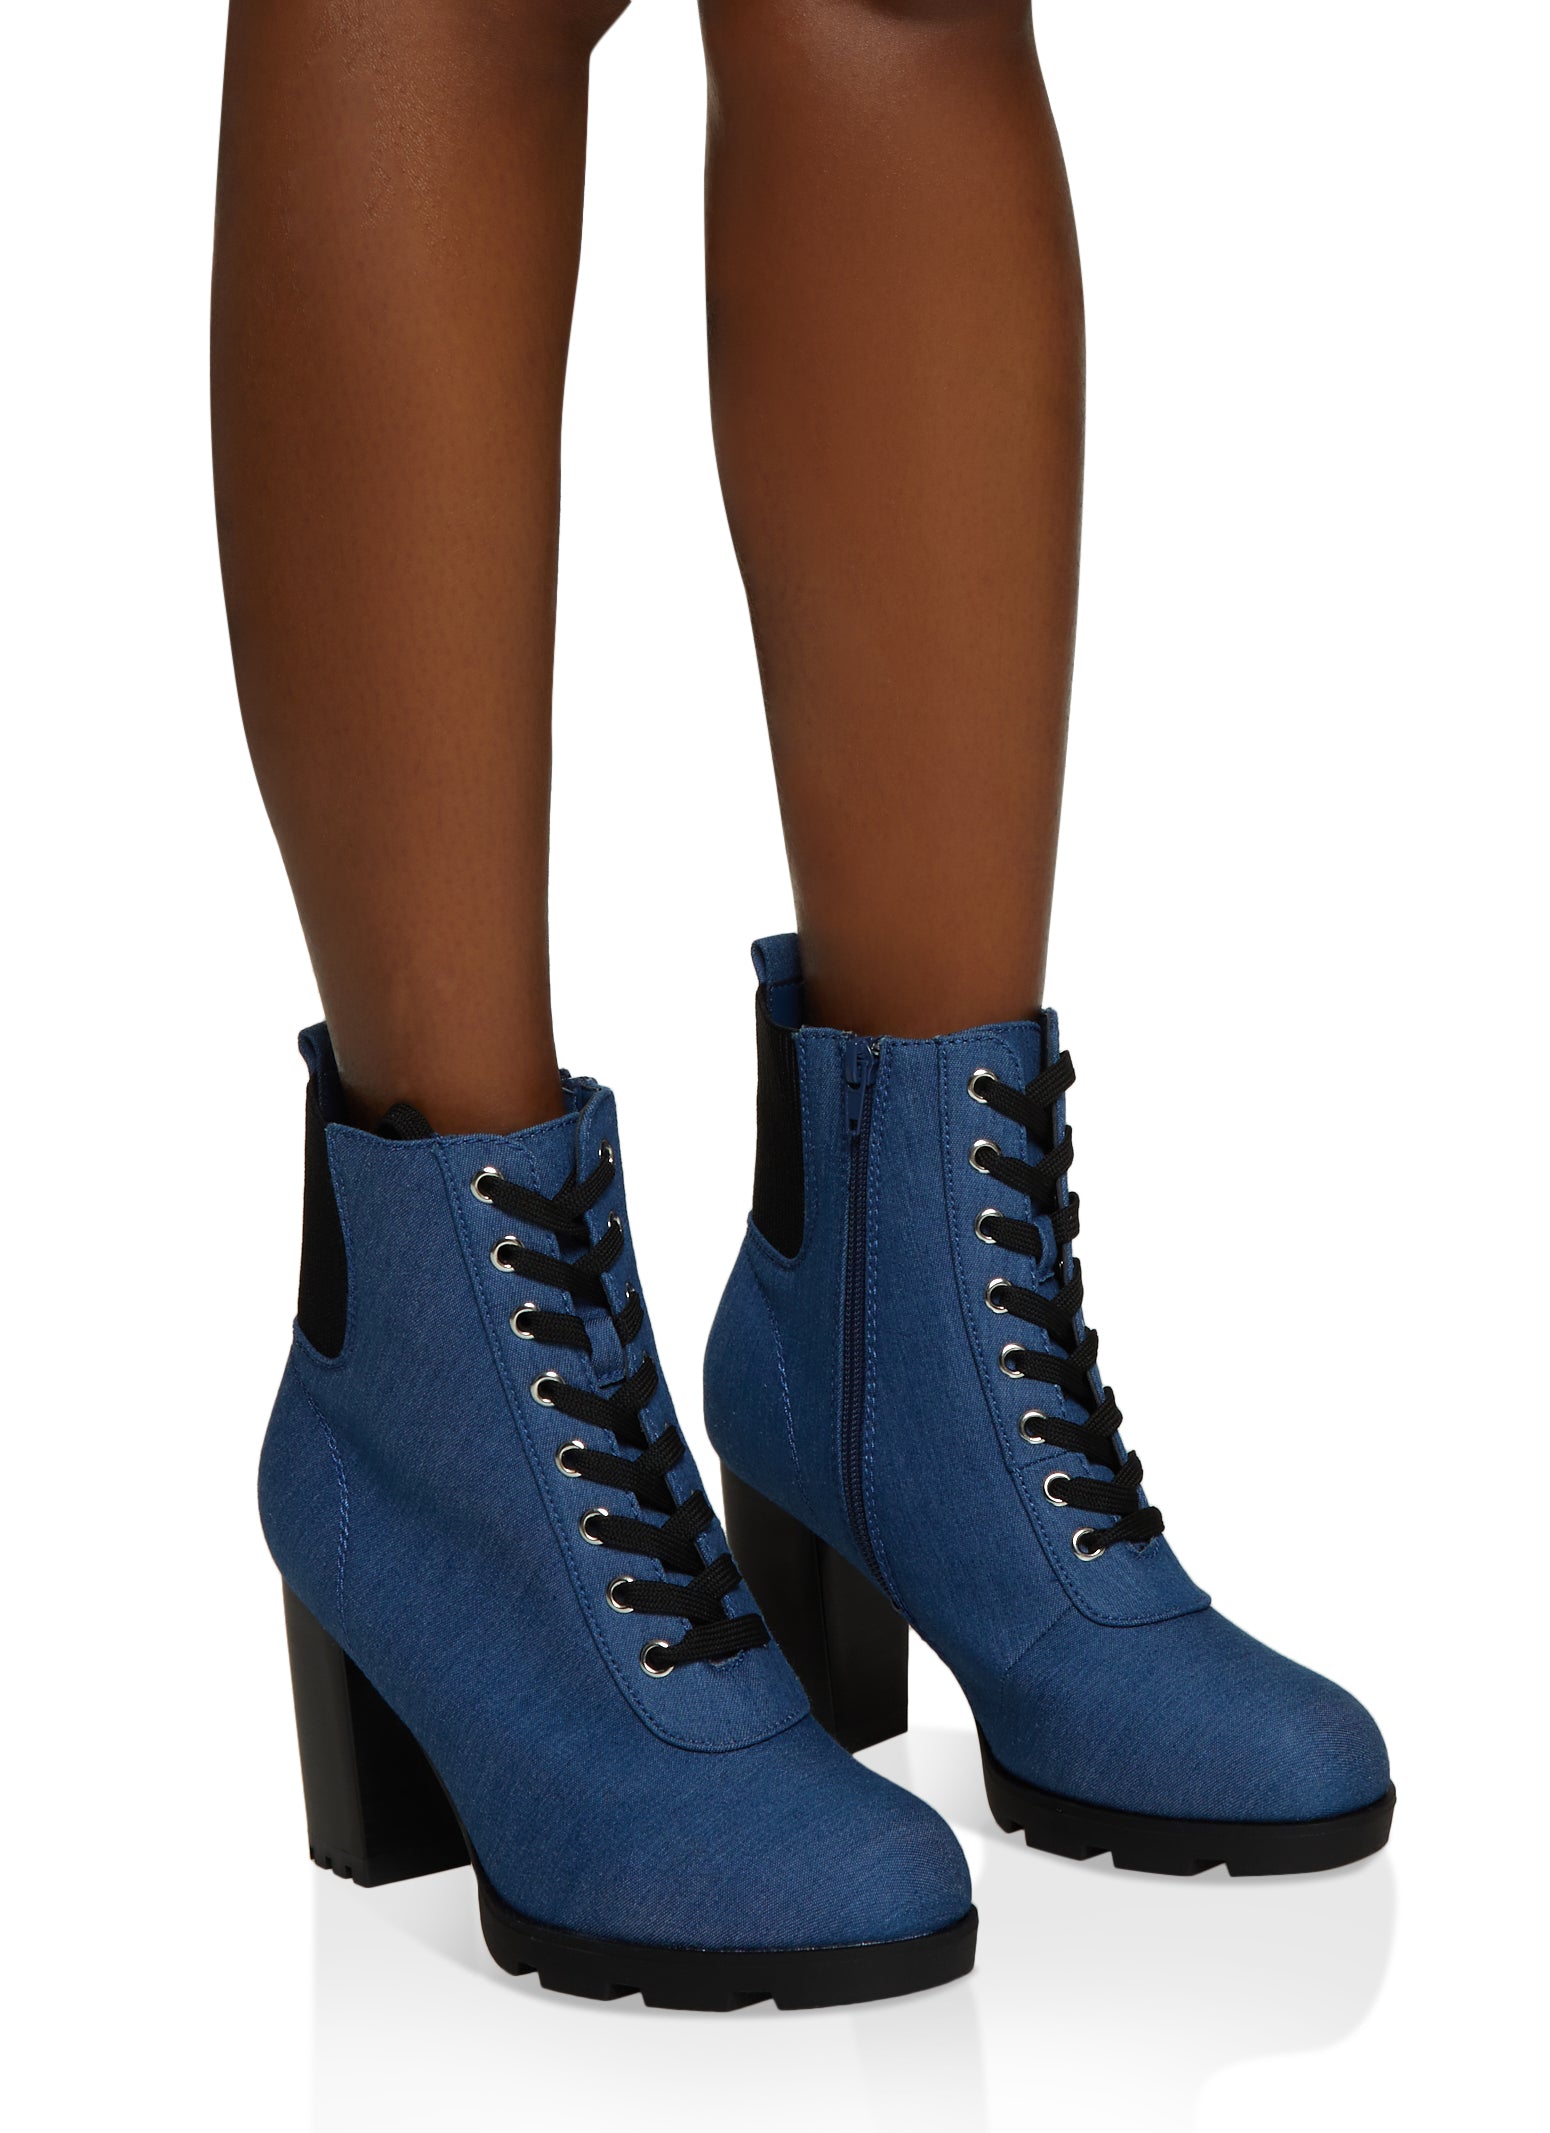 Buy FOREVER 21 Women Navy Blue Denim Heeled Boots - Boots for Women 2261023  | Myntra